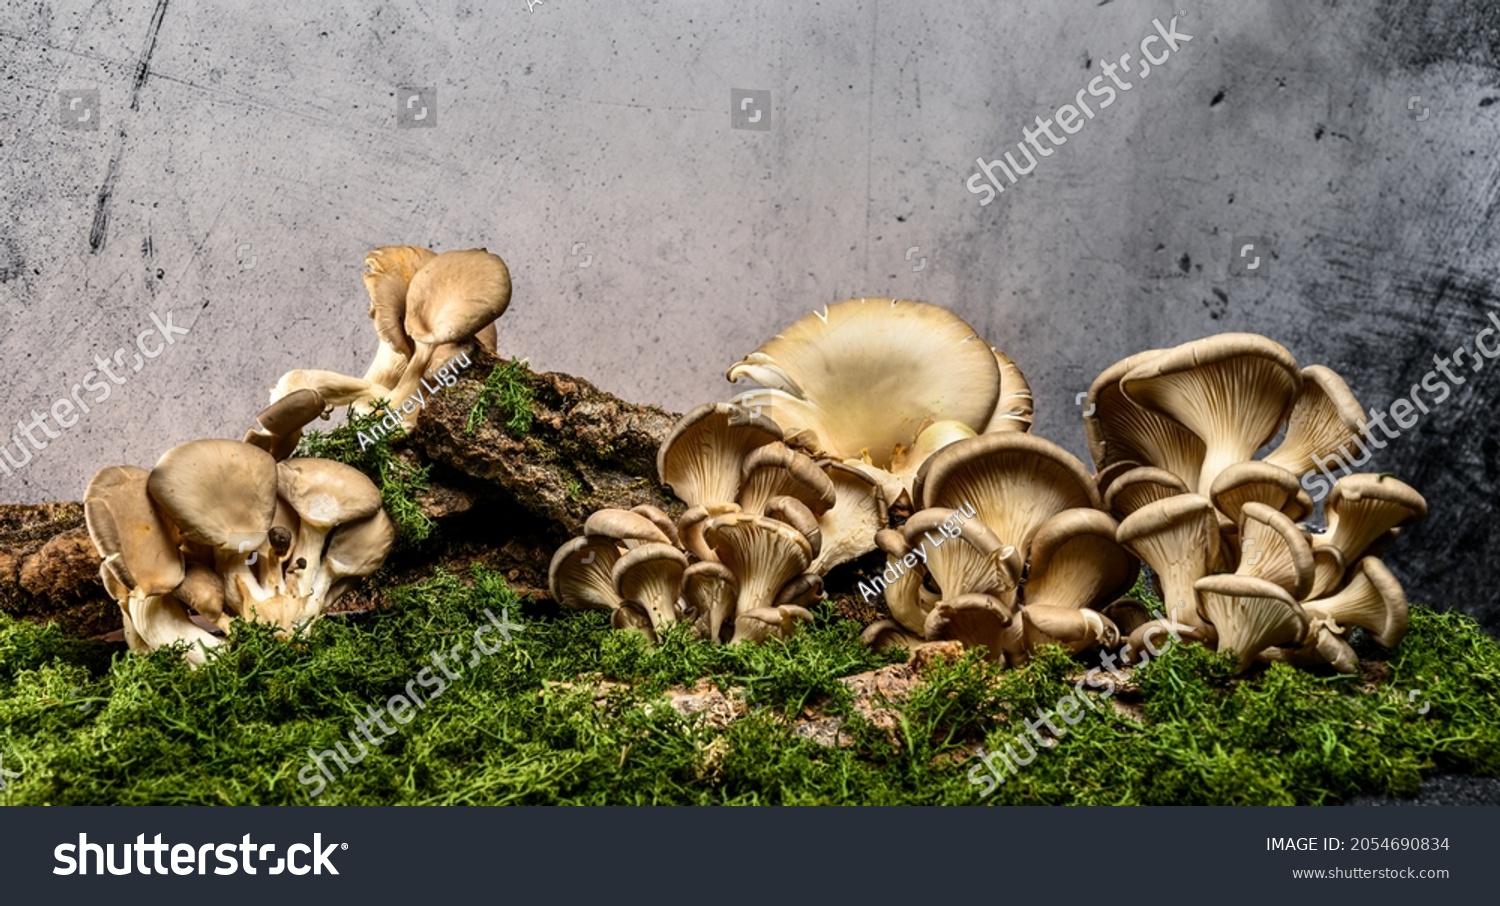 A group of mushrooms on the bark of a tree. Oyster mushrooms (Veshenki). Moss and grass from below. Gray background. #2054690834